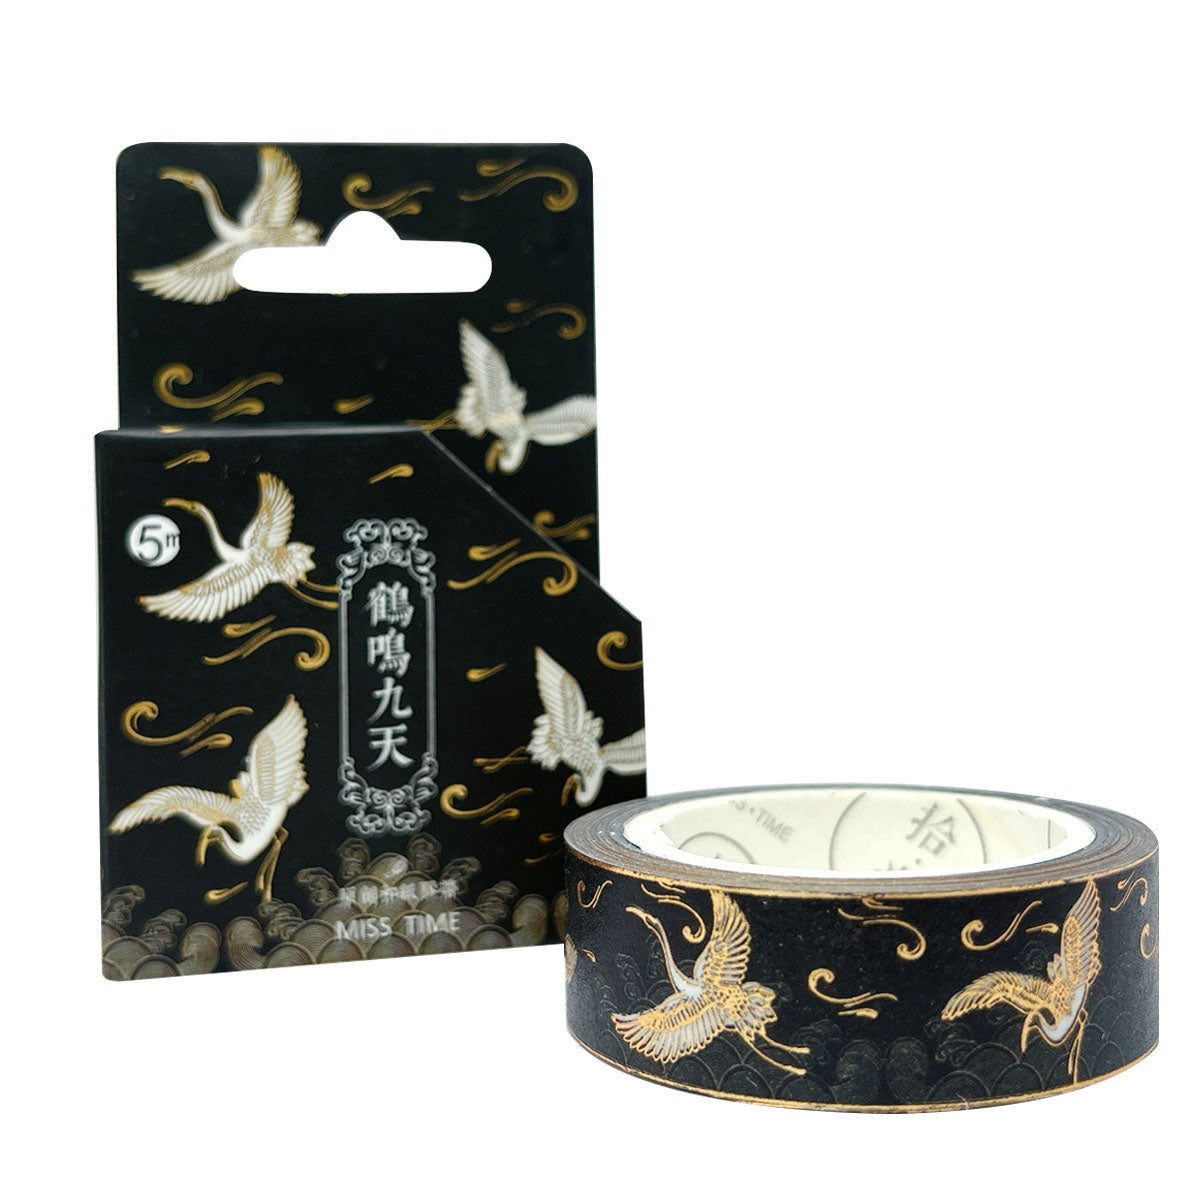 Wrapables Poetic Picturesque Gold Foil Washi Masking Tape, 15mm x 5M